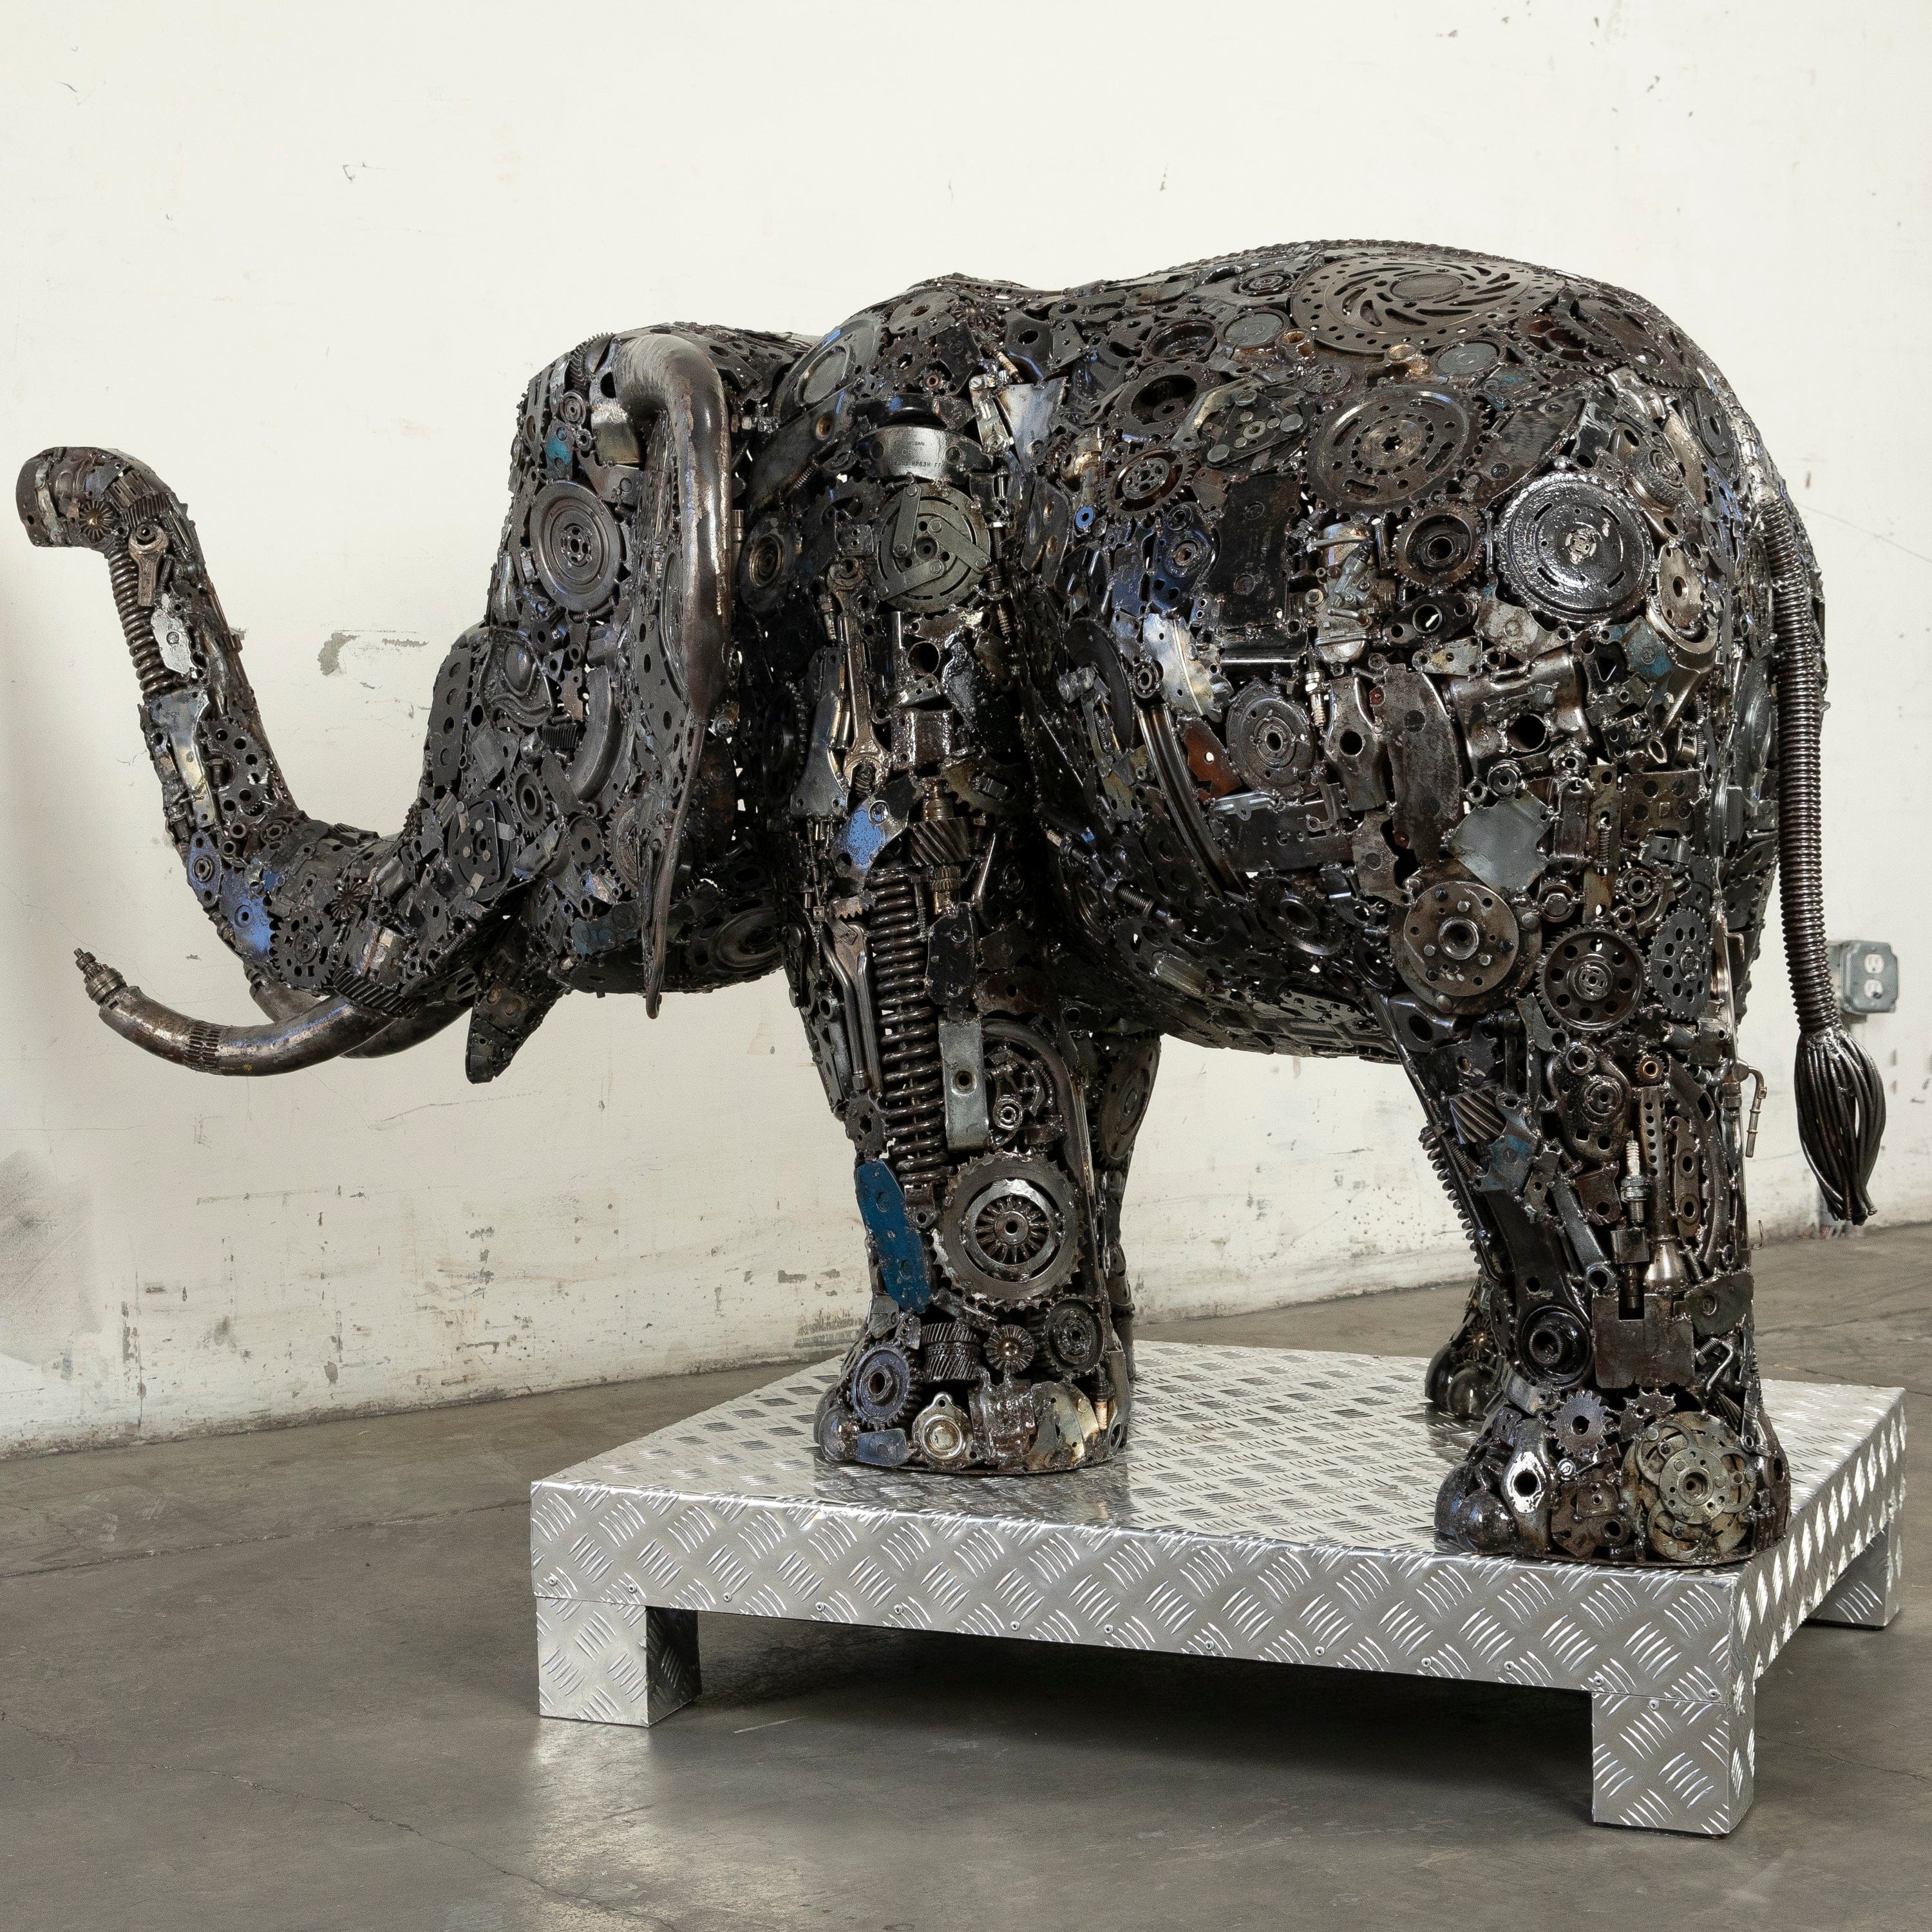 Kalifano Recycled Metal Art 60" Elephant Inspired Recycled Metal Sculpture RMS-ELE150-N